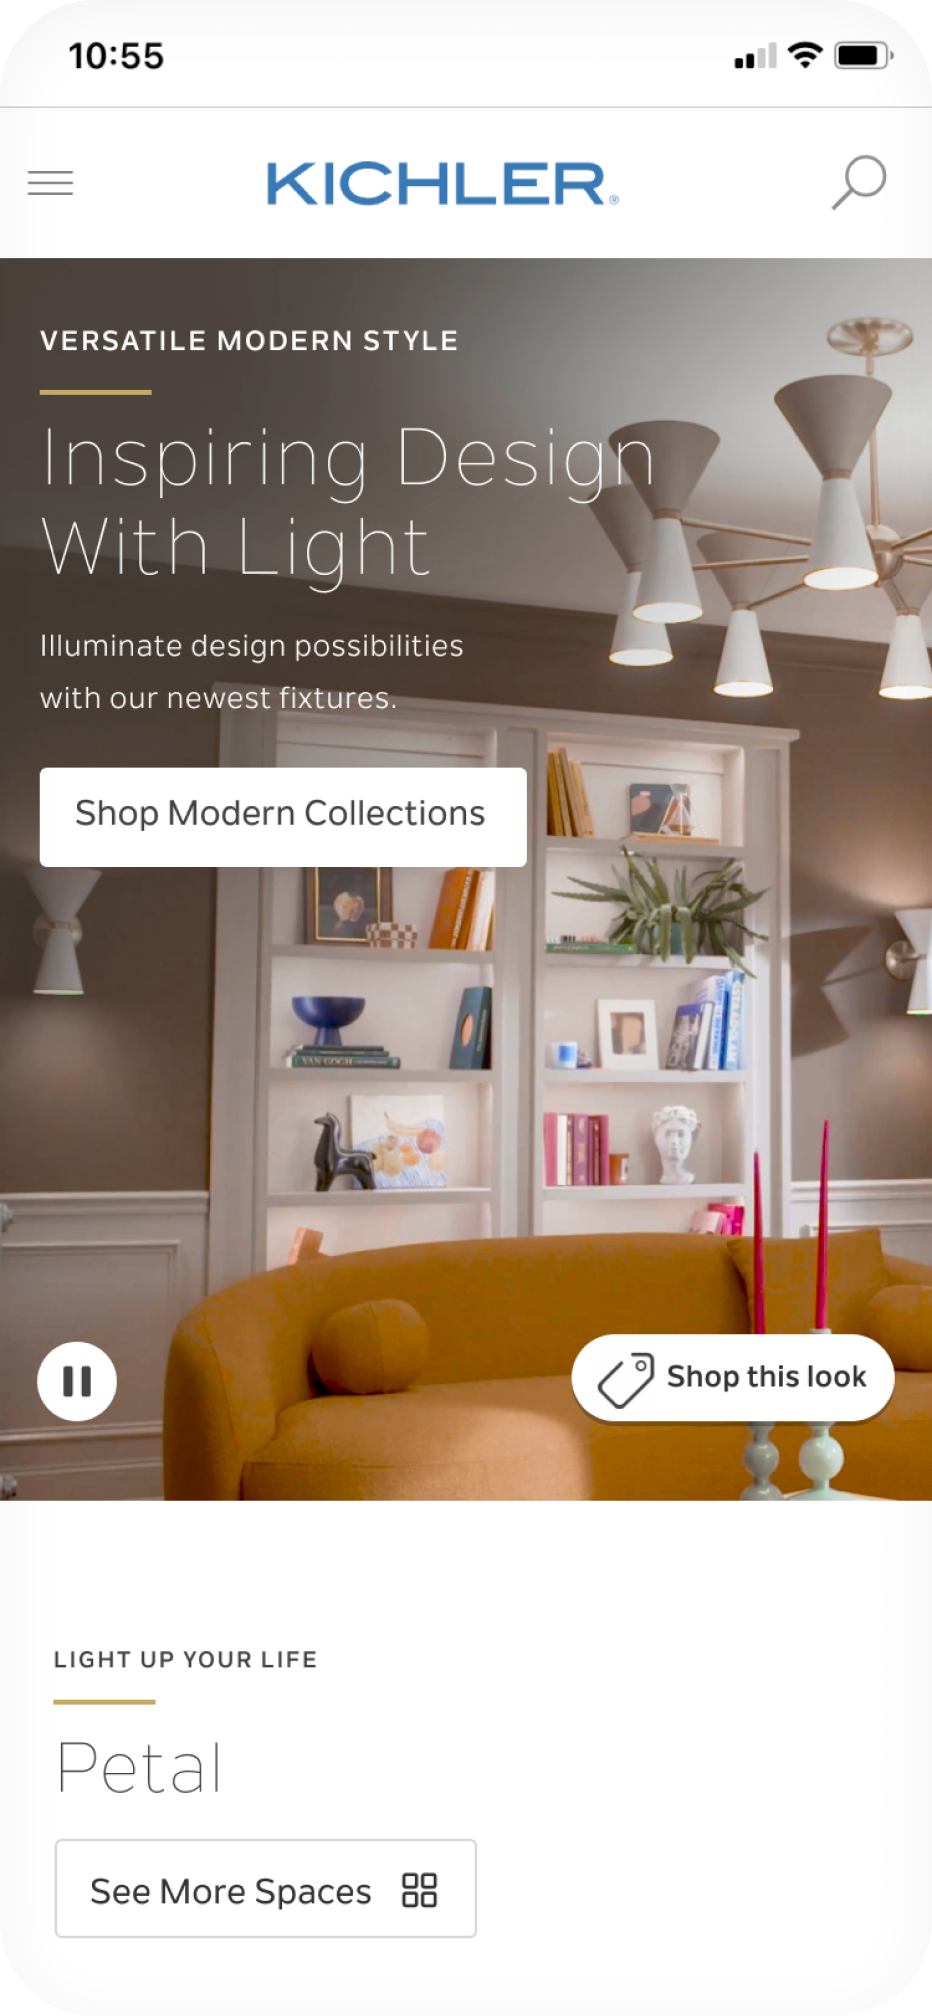 Homepage hero section titled "Inspiring Design With Light"